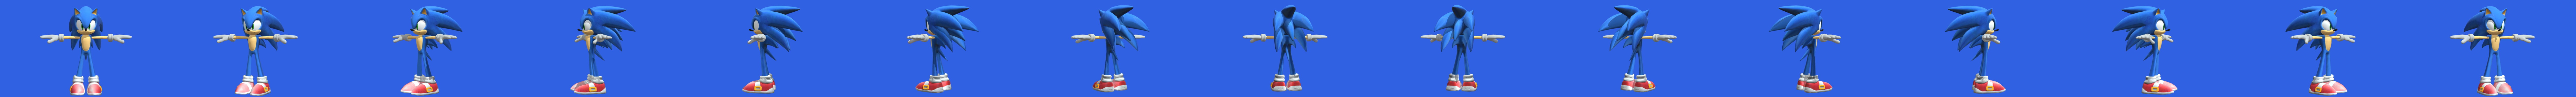 Xbox 360 - Sonic The Hedgehog 2006 - Sonic - Download Free 3D model by  SonicModelArchive (@Gabby.Sanabria.de.Geraci) [8aad0bd]